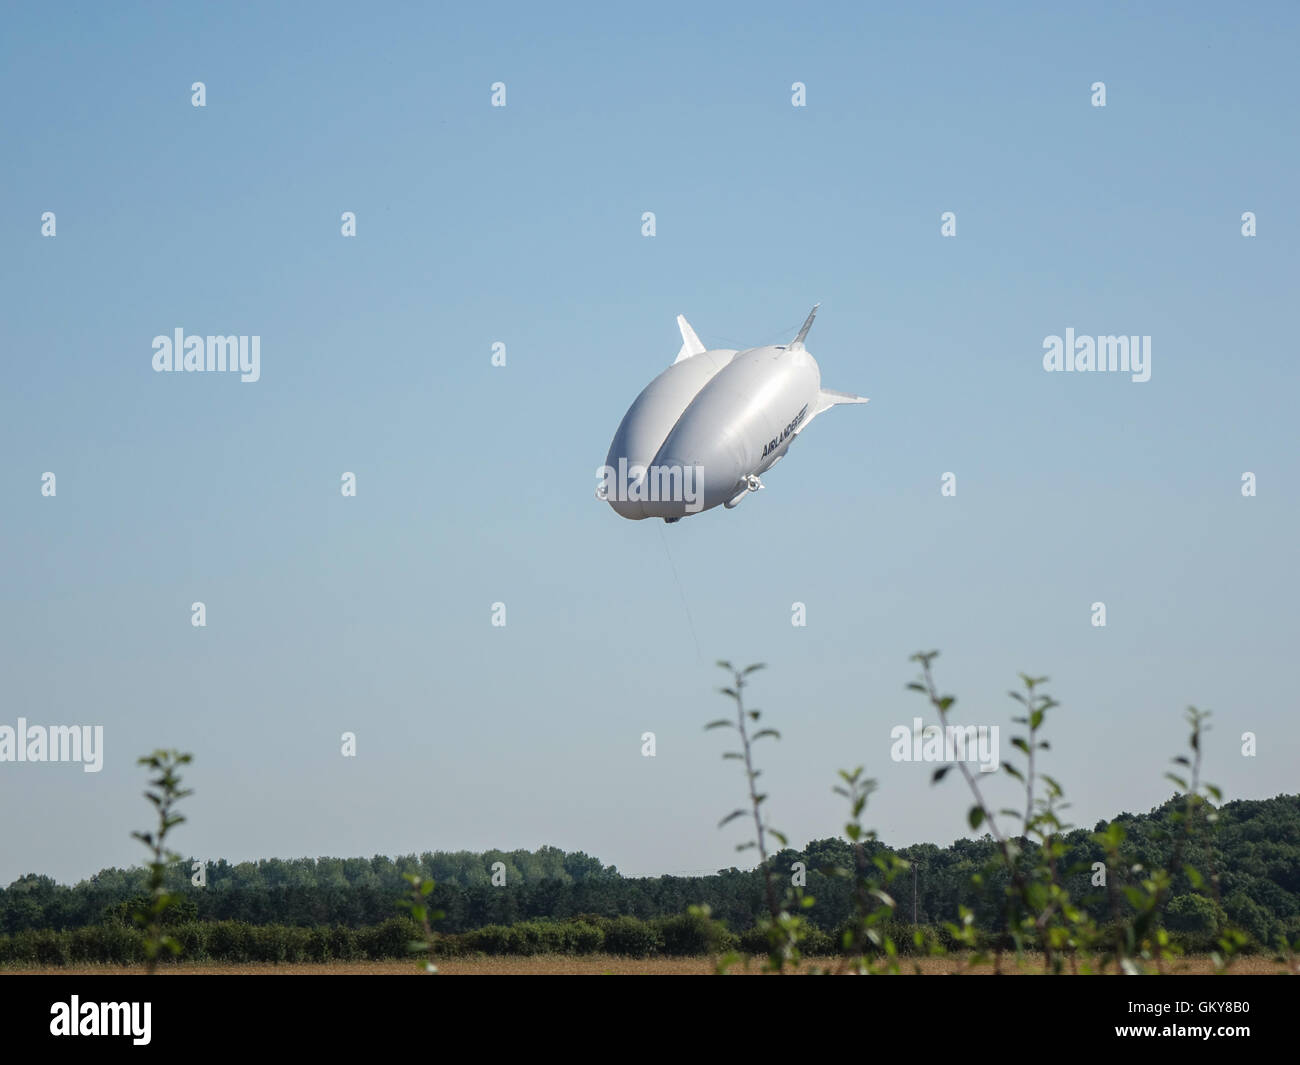 Bedfordshire, UK. 24th August, 2016, The Hybrid Air Vehicles (HAV) Airlander 10 undergoing test flights over the Bedfordshire and Hertfordshire countryside. In a steep dive near the Historic RAF Cardington Hangars it is a broad-hulled airship with auxiliary wing and tail surfaces, it flies using both aerostatic and aerodynamic lift. Powered by four diesel-engine driven ducted propellers, it is the largest aircraft flying today.  Within the next hour this aircraft had crash landed at the base station, causing some damage to the cockpit. Photo Credit:  Mick Flynn/Alamy Live News Stock Photo